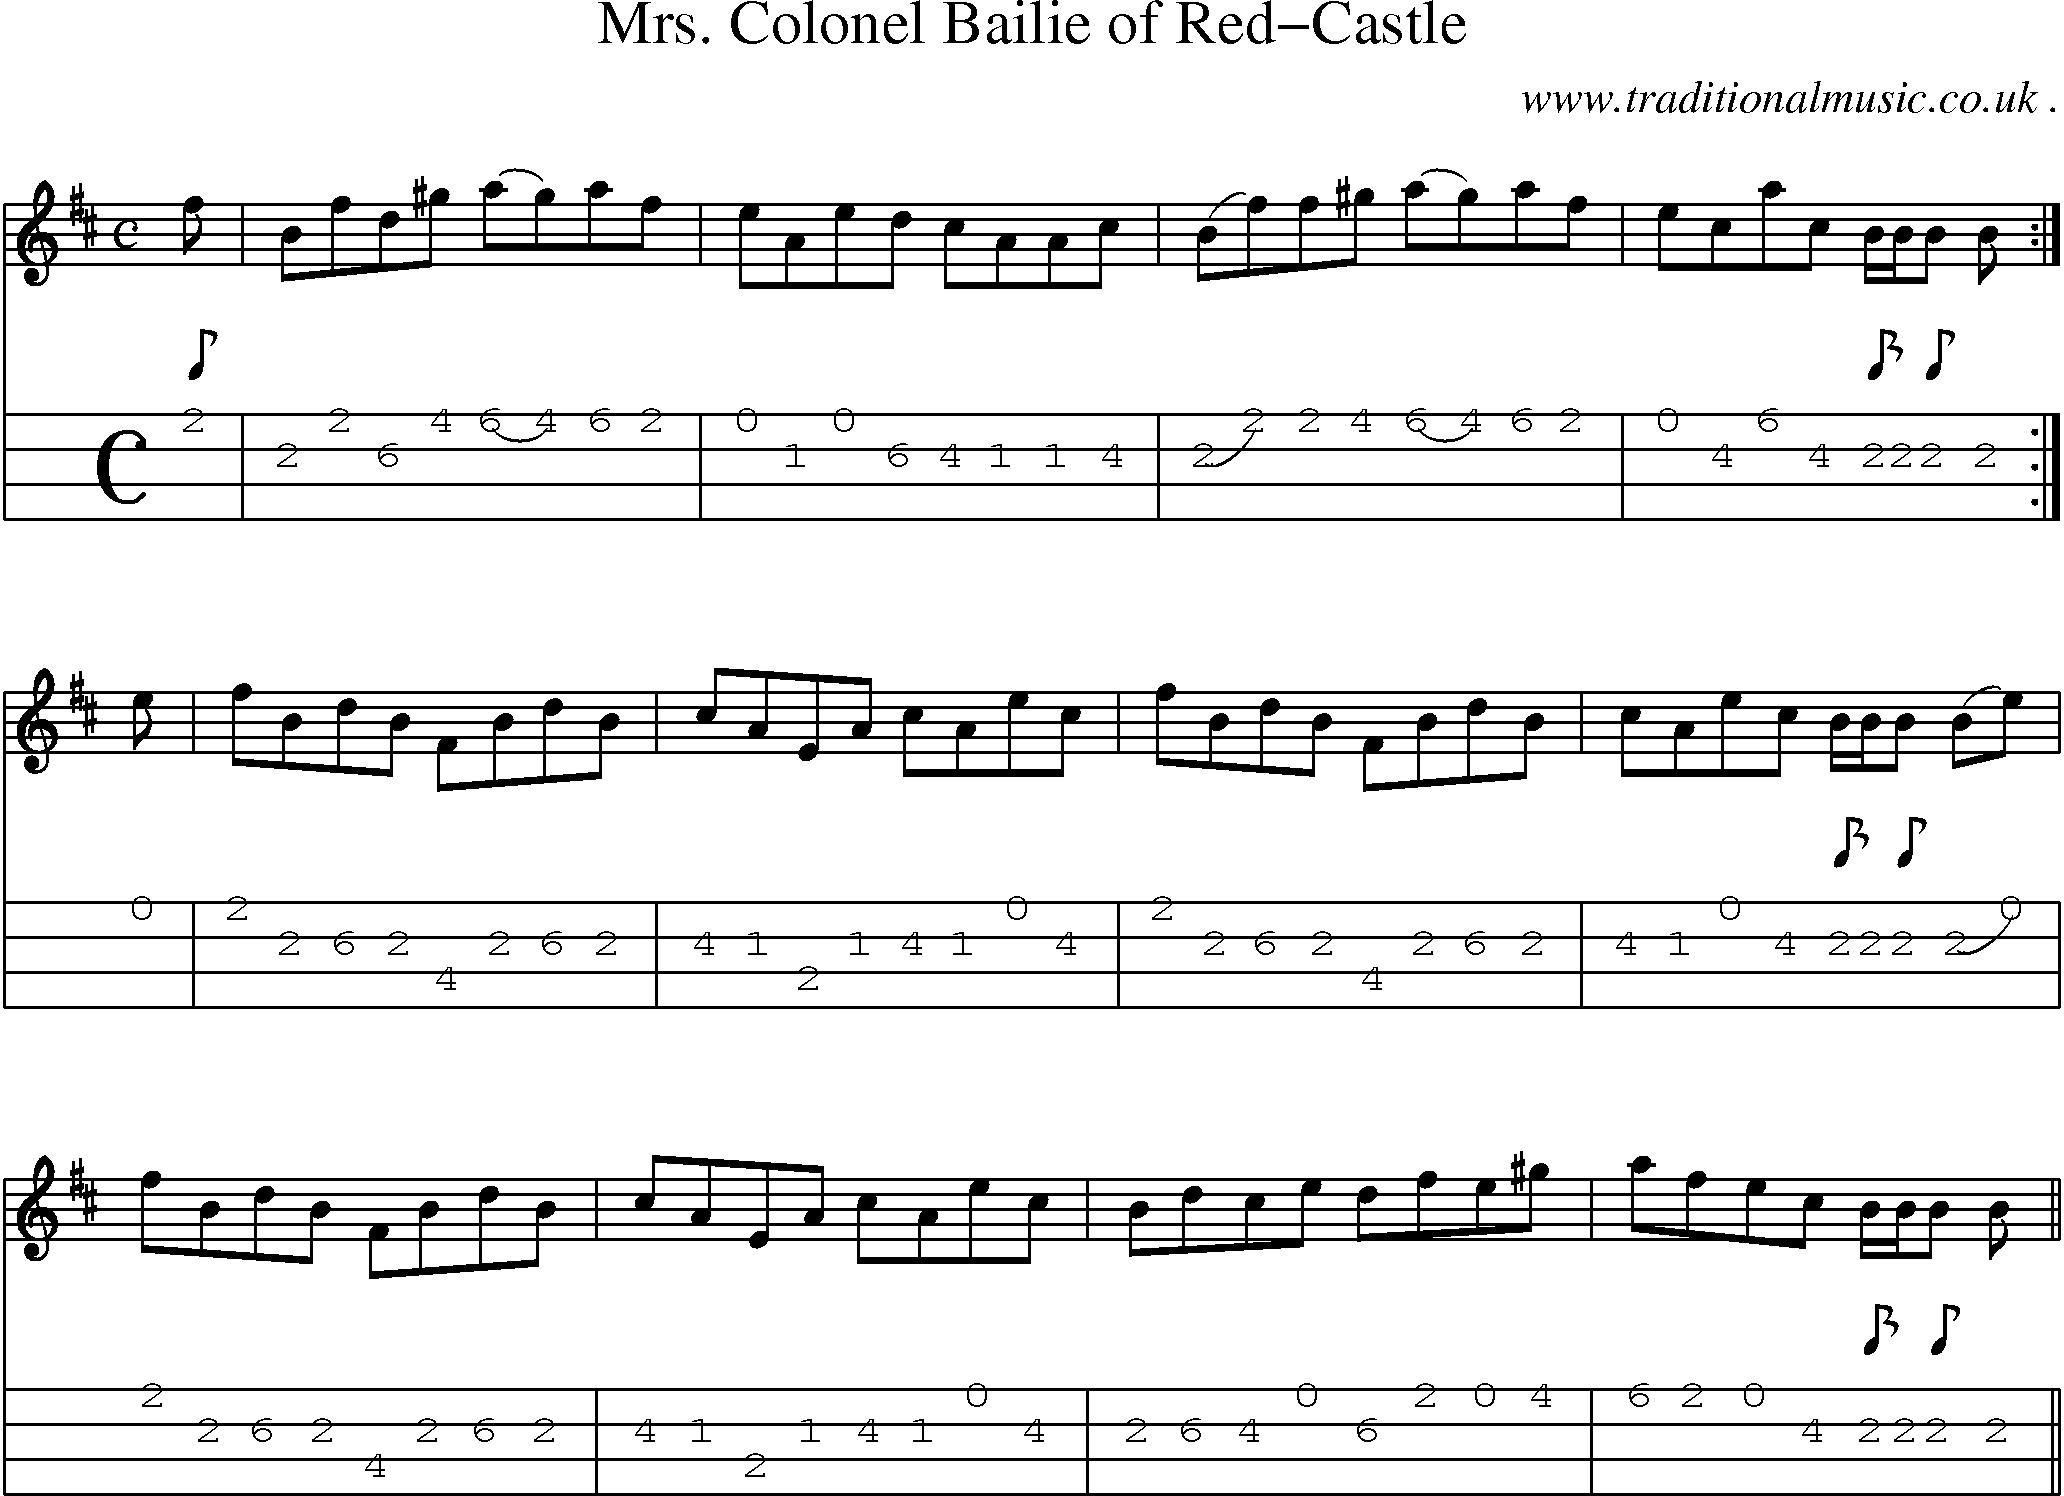 Sheet-music  score, Chords and Mandolin Tabs for Mrs Colonel Bailie Of Red-castle